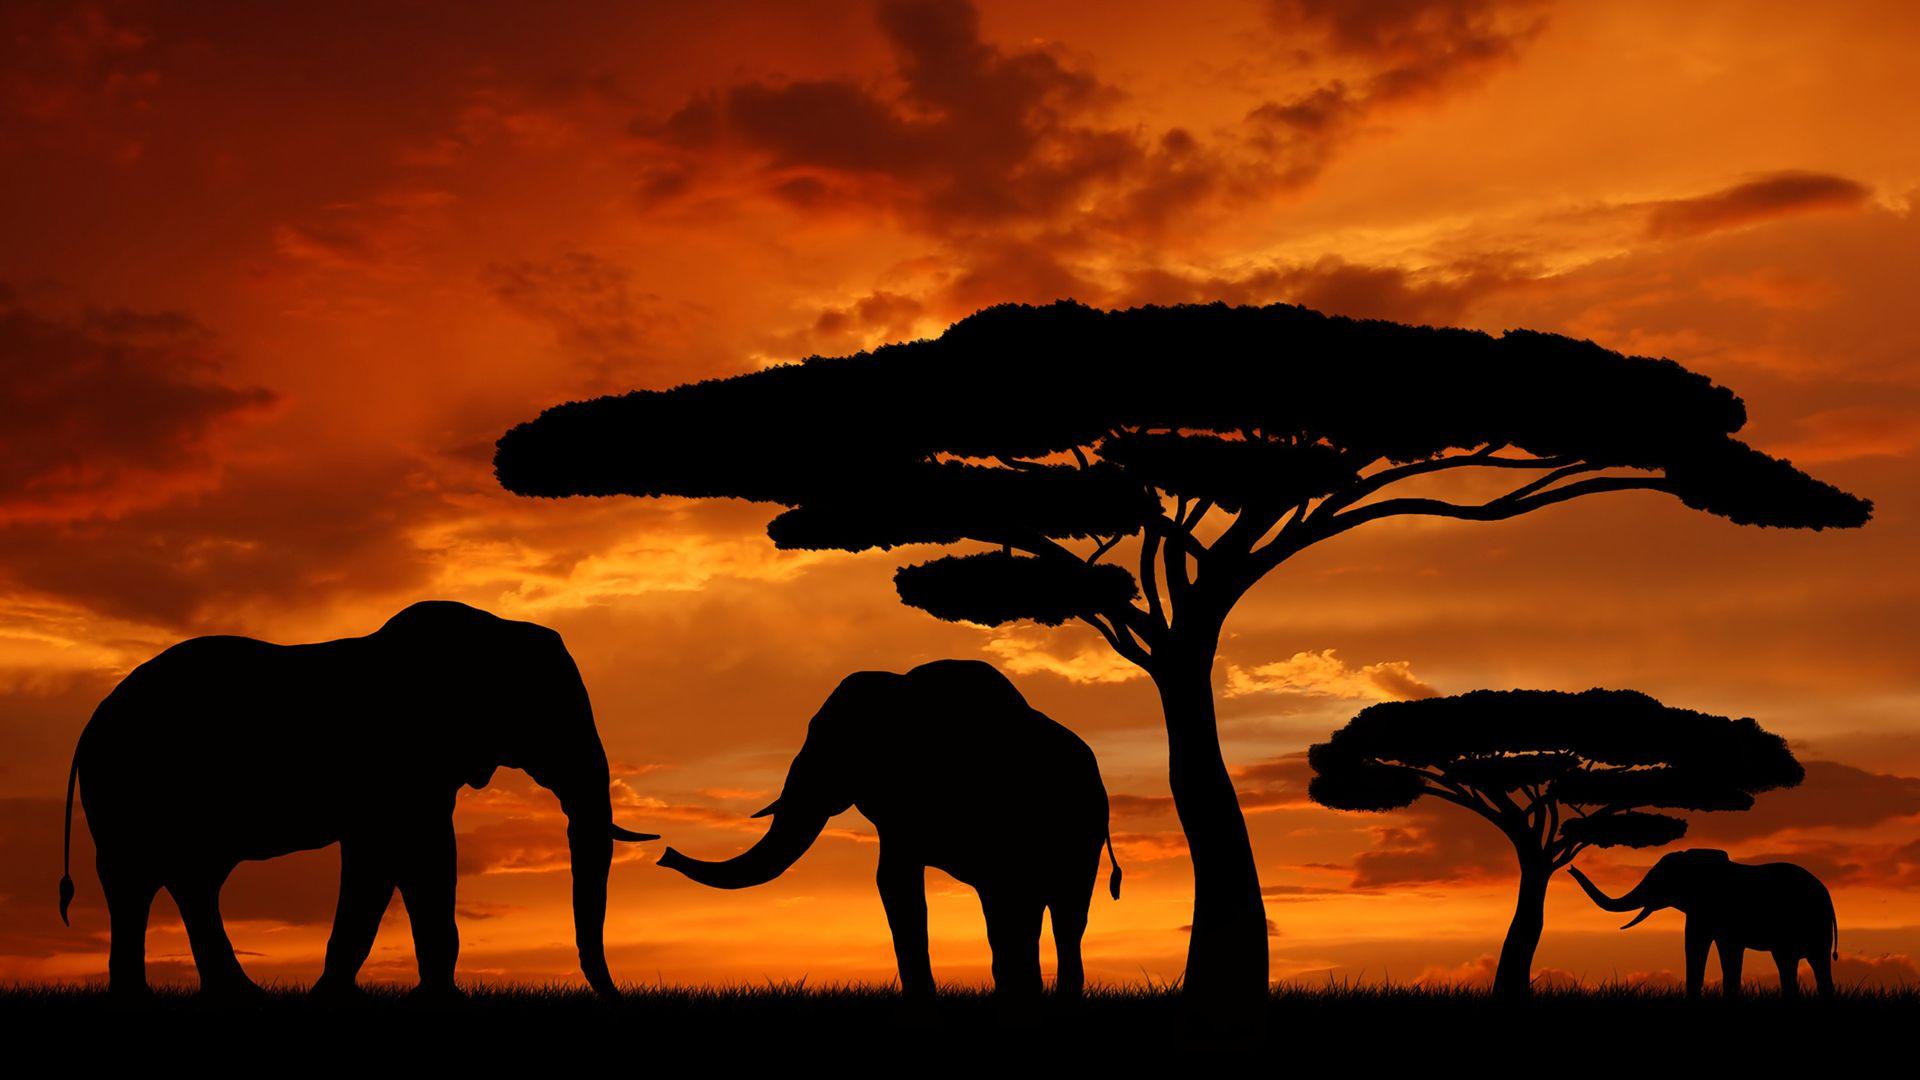 Silhouette Elephants In The Sunset